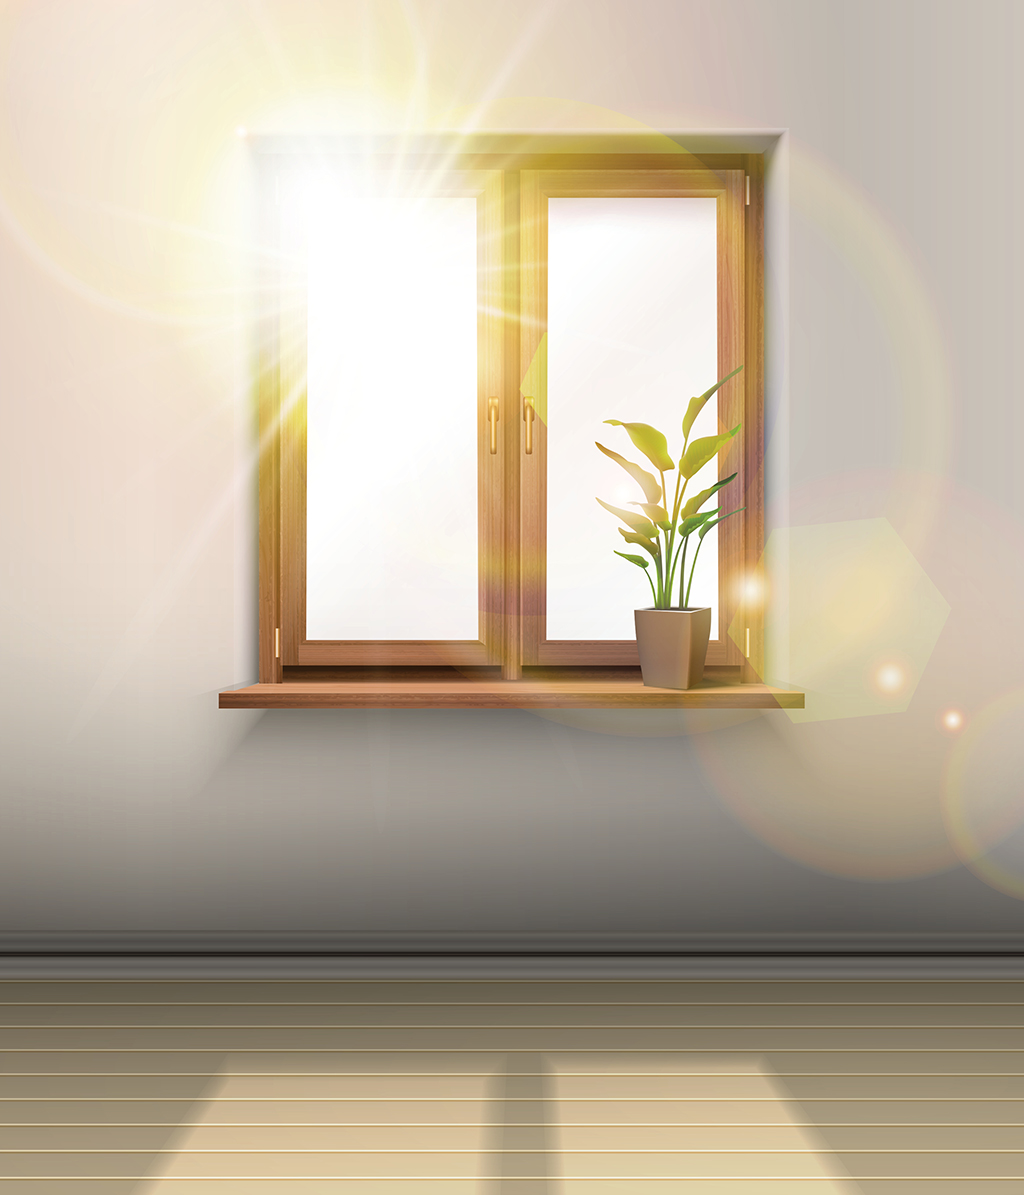 8 Reasons To Have New Windows Installed In Your Home | Oahu, HI